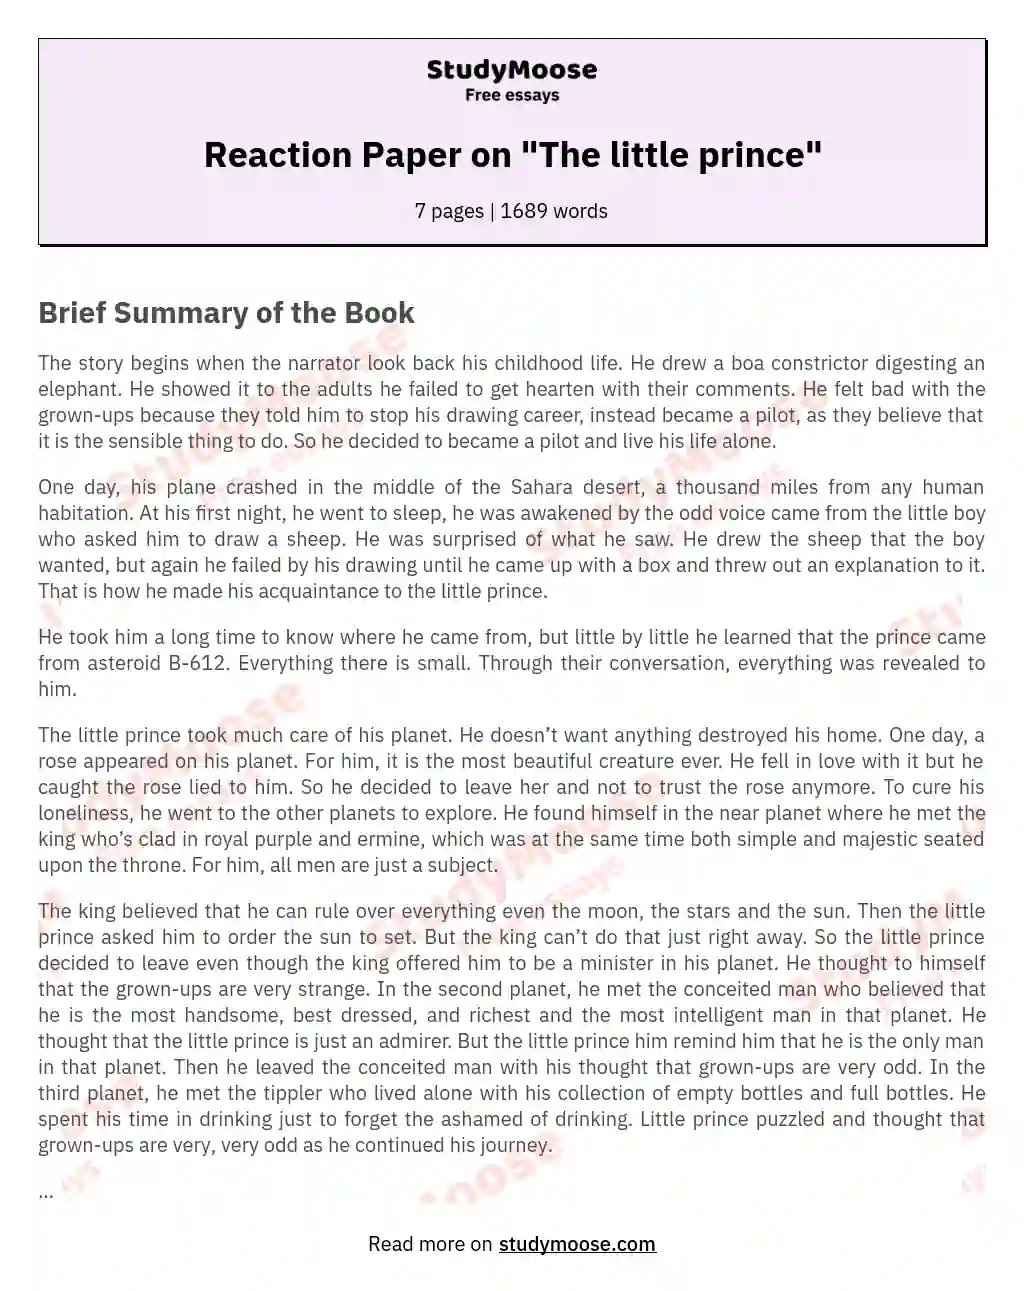 Reaction Paper on "The little prince" essay